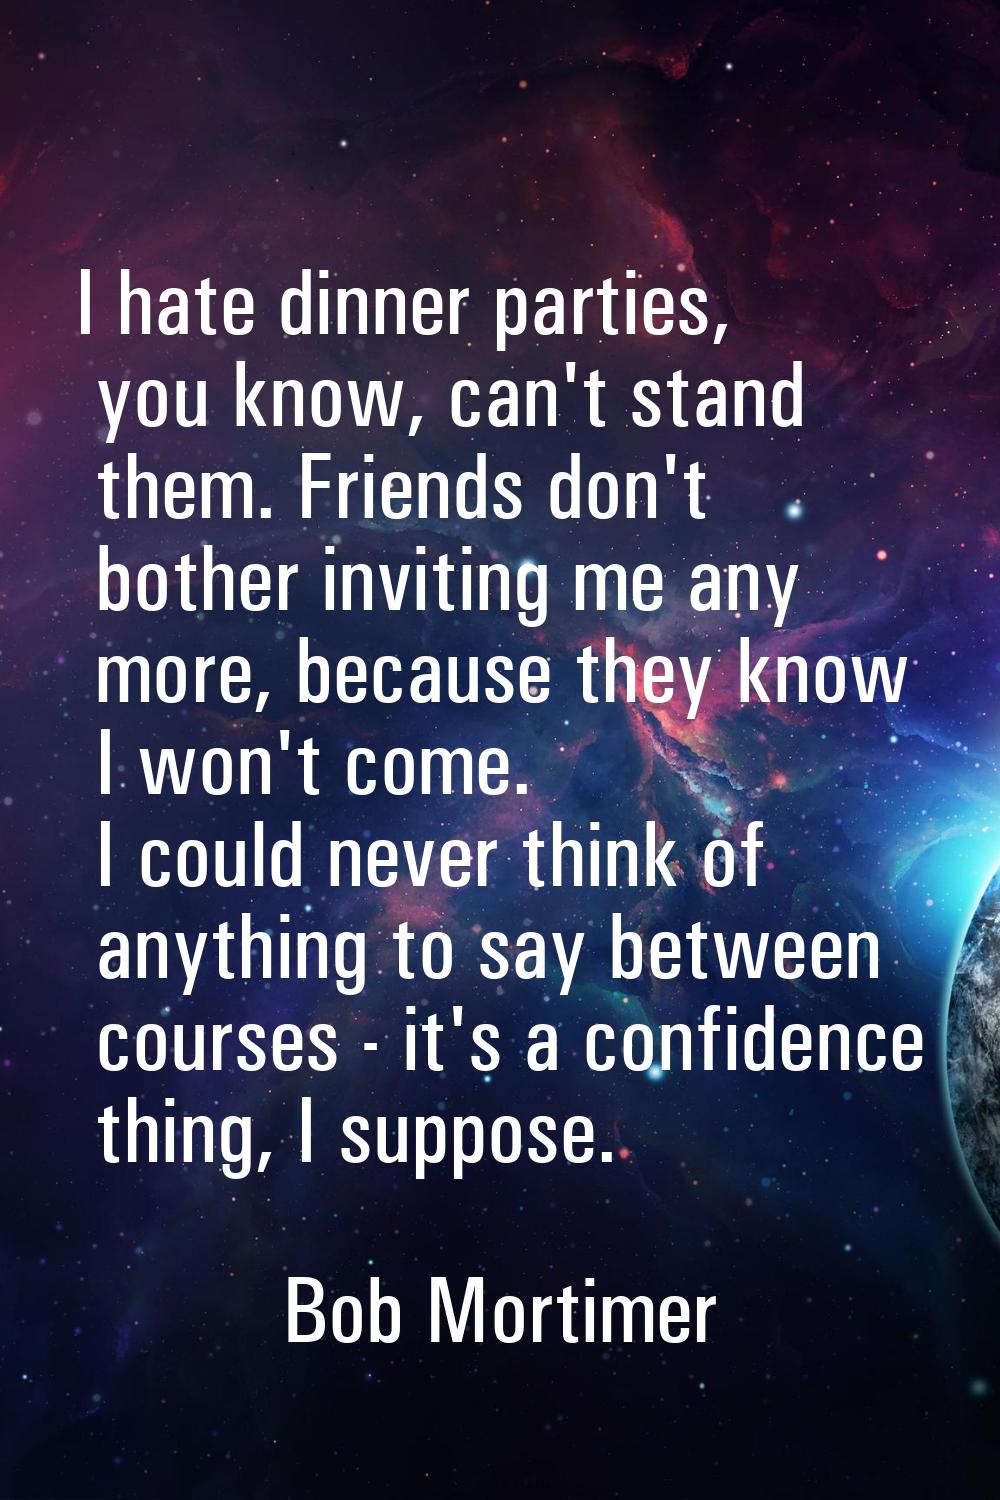 I hate dinner parties, you know, can't stand them. Friends don't bother inviting me any more, becau